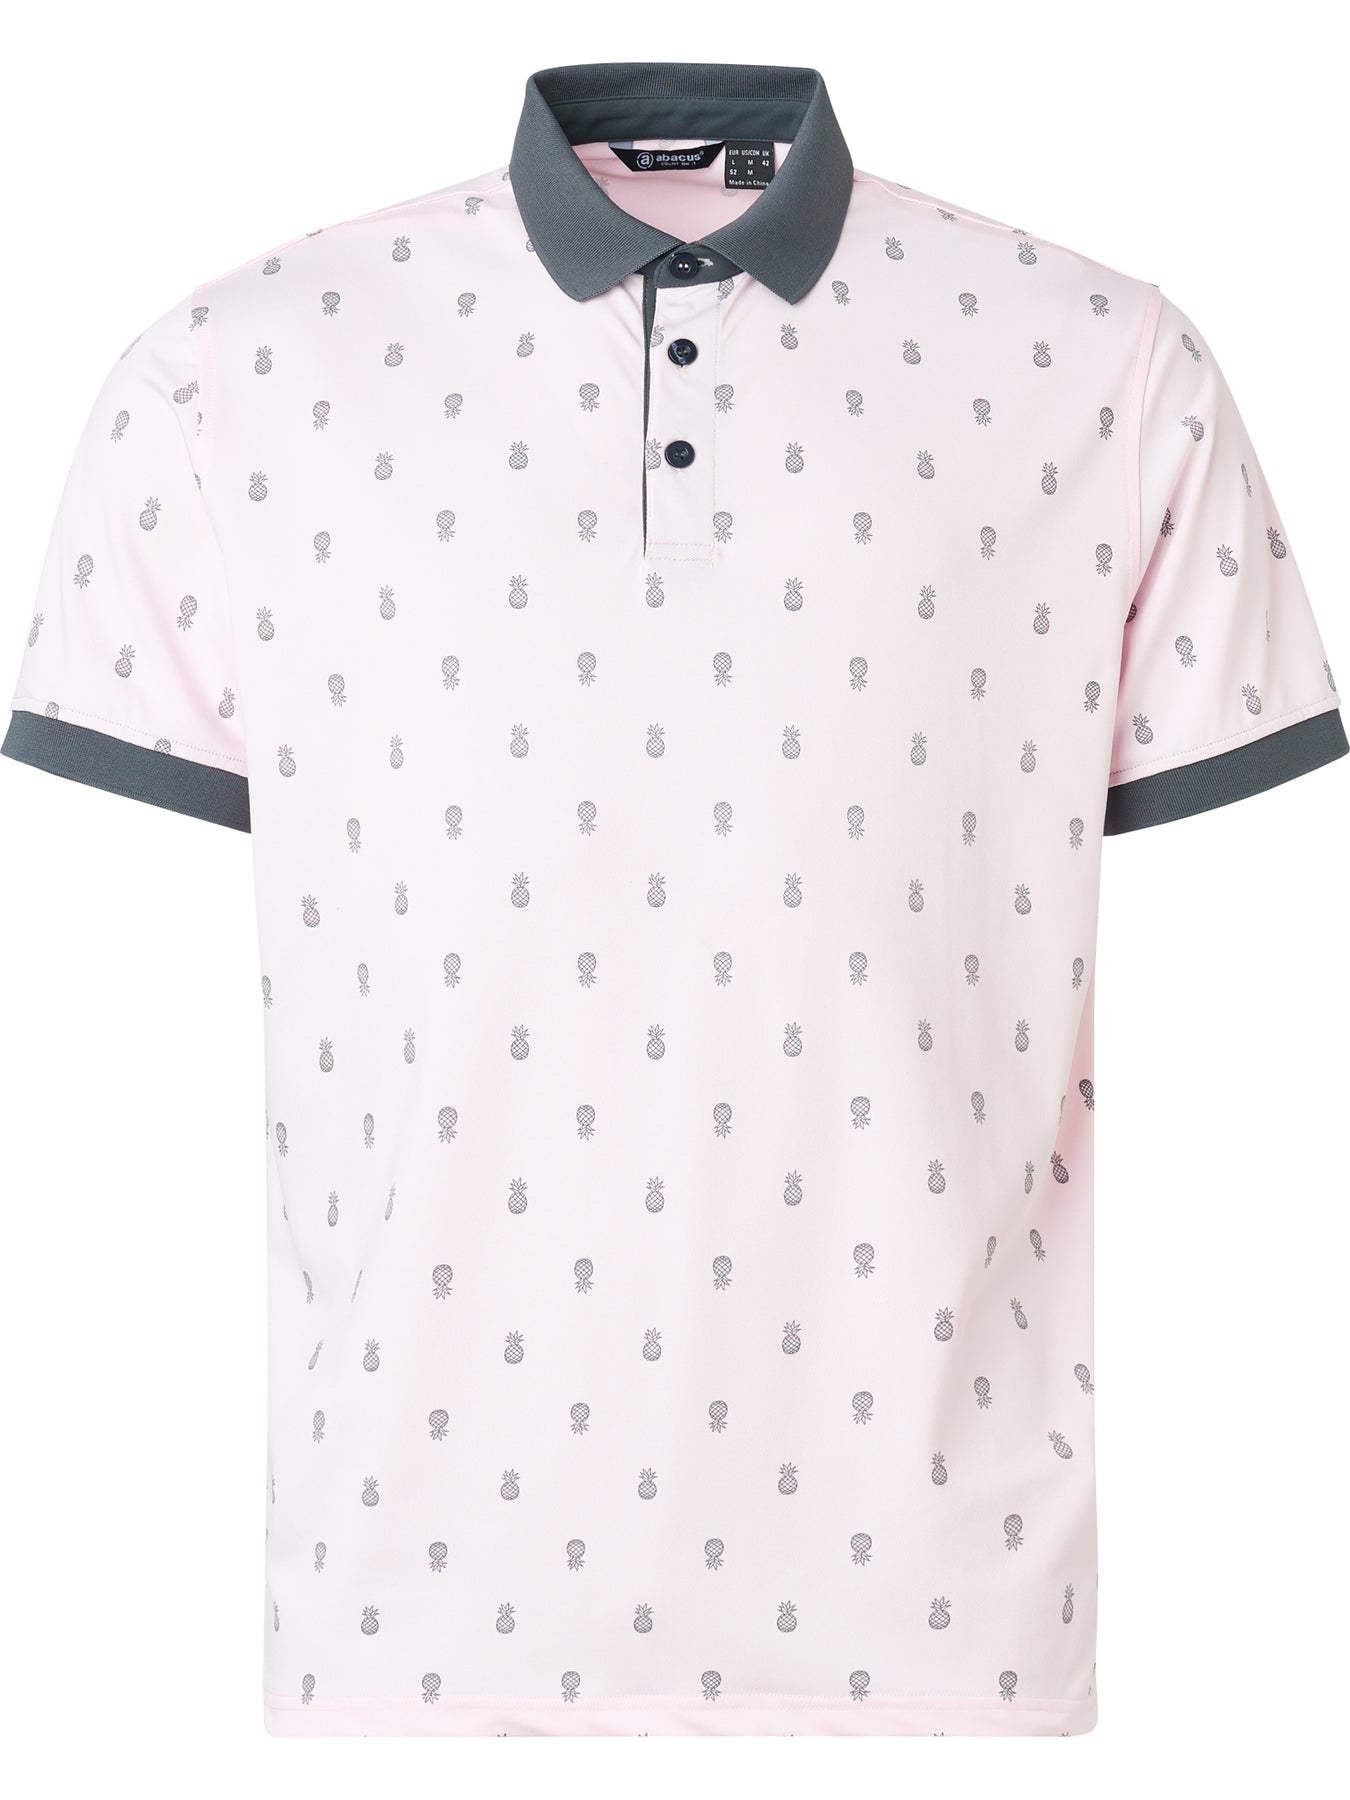 Abacus Sports Wear: Men’s High-Performance Golf Polo – Dower